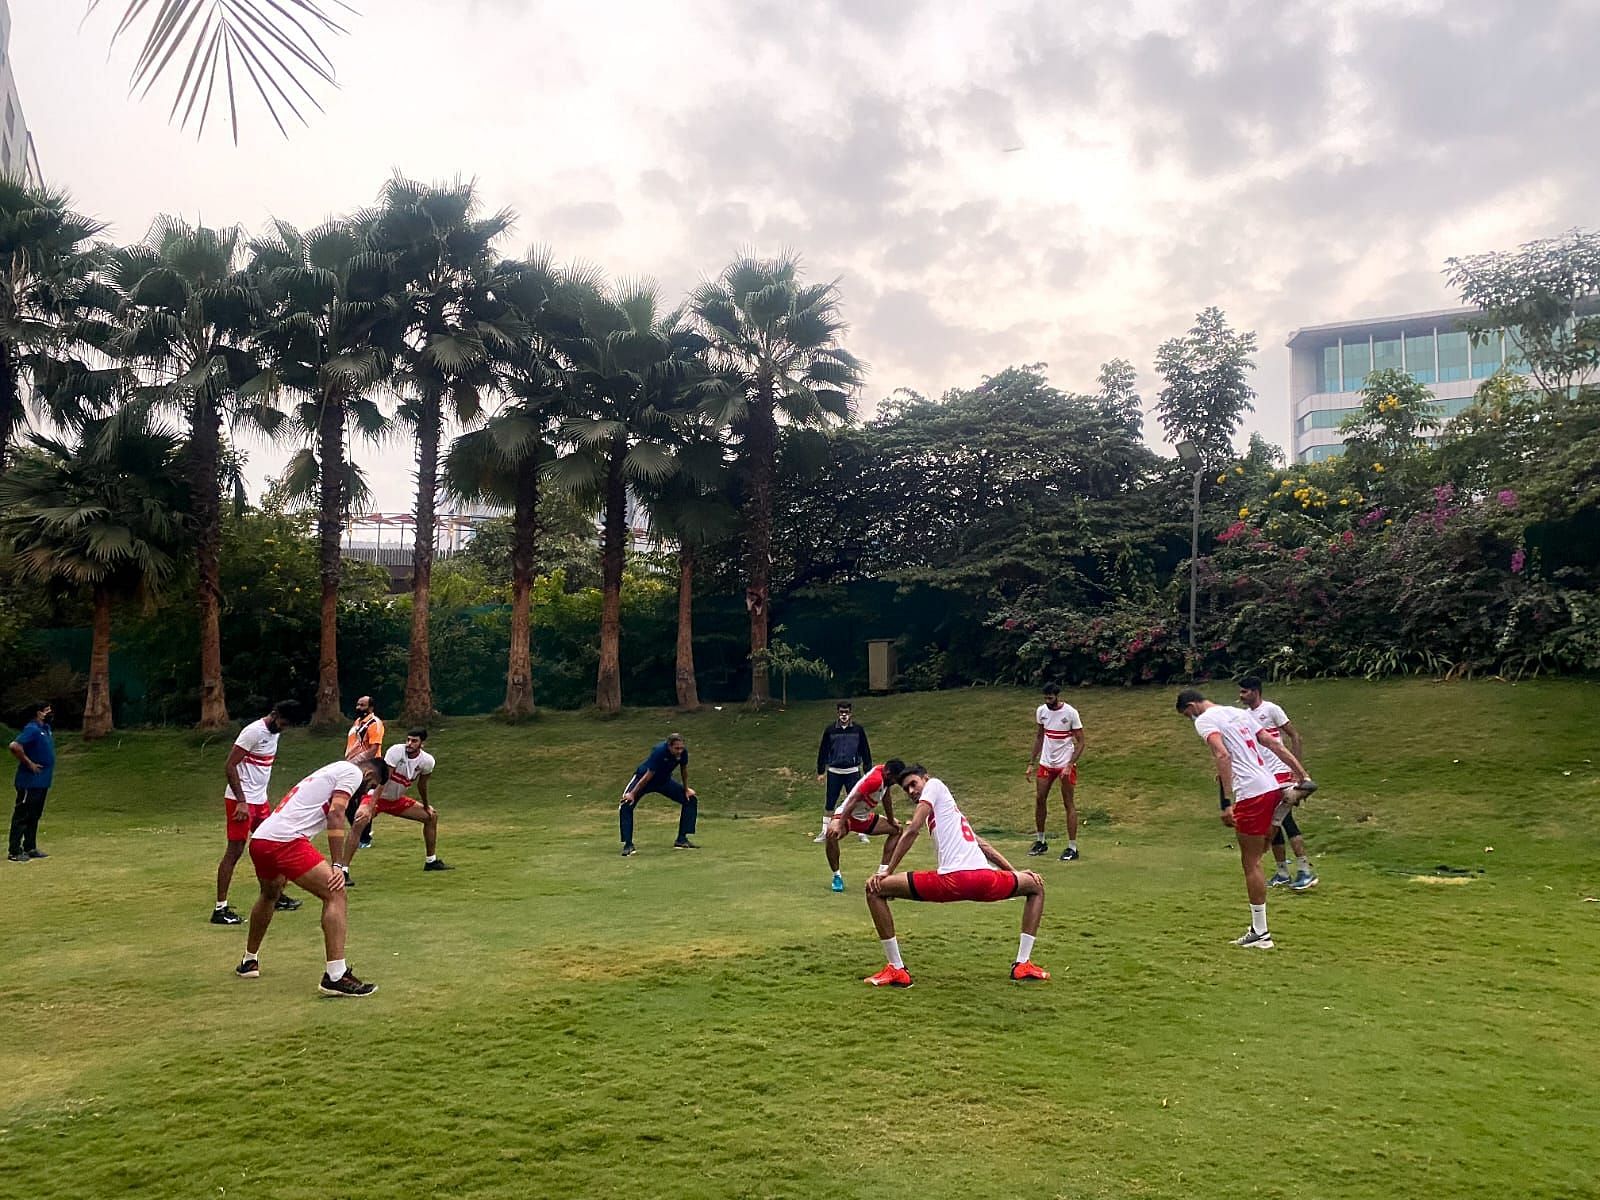 Dr Adnan Brar overseeing a routine exercise with the Kolkata Thunderbolts team. (PC: PVL)